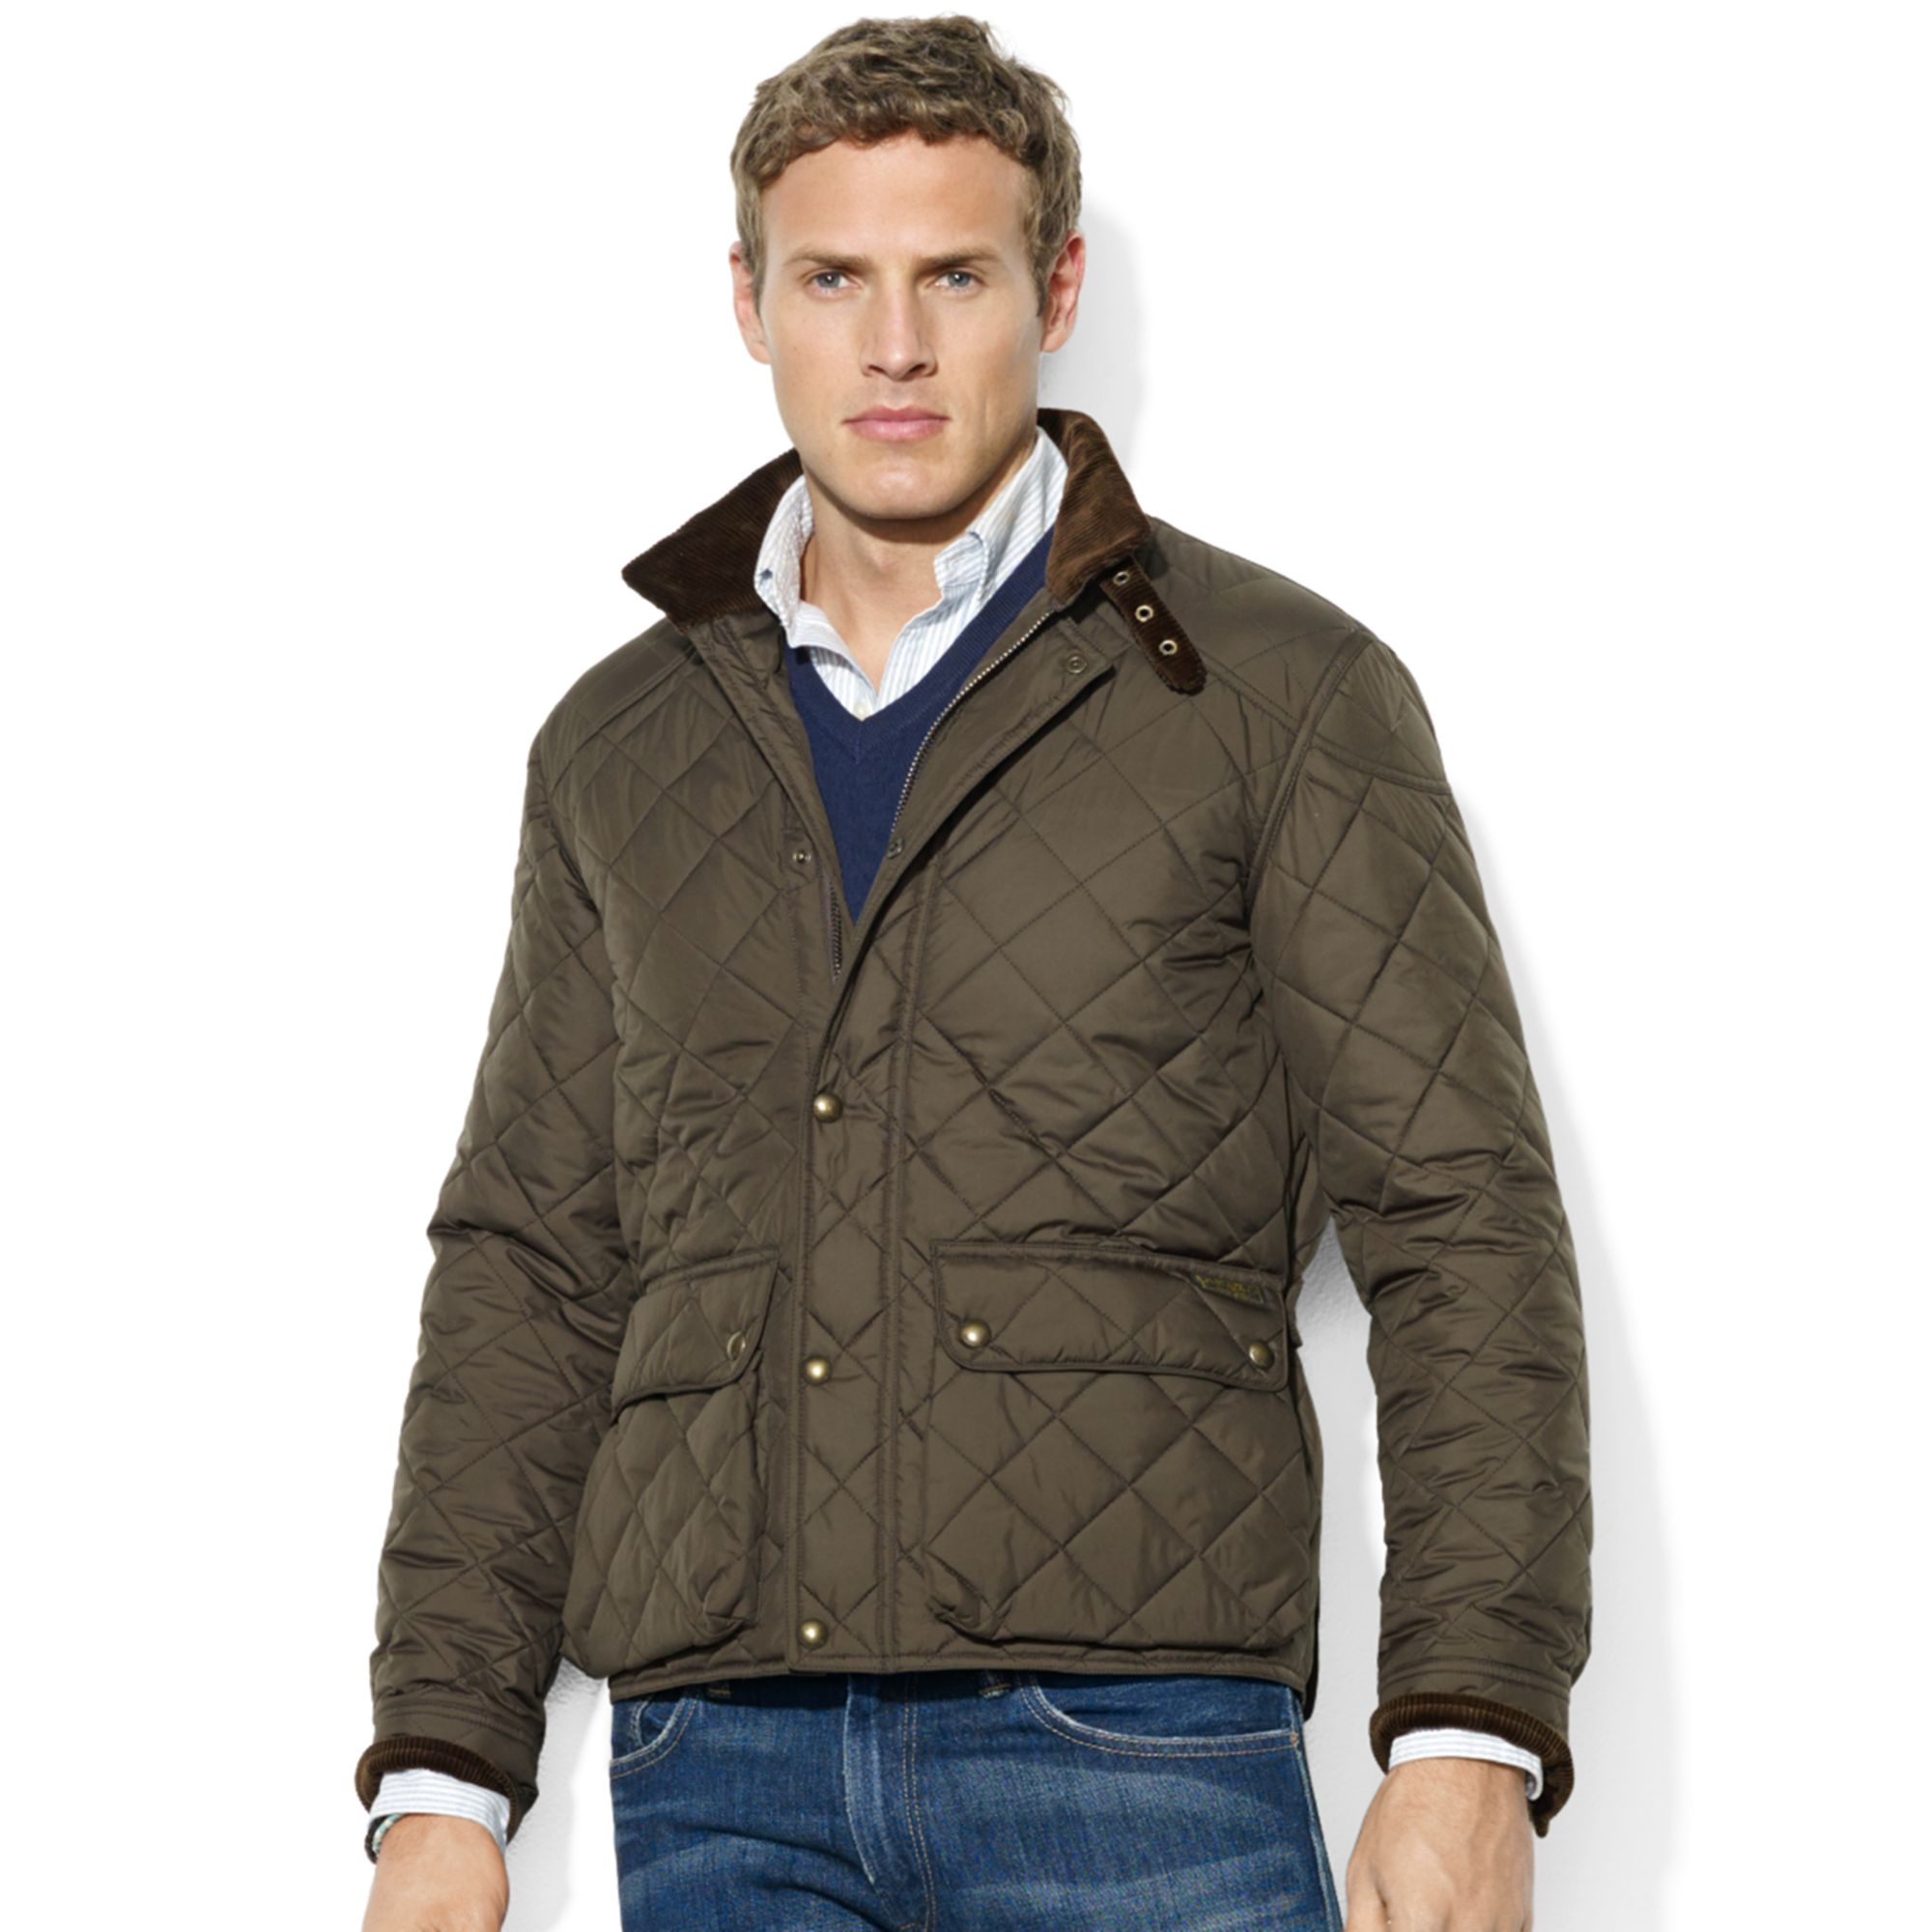 Ralph Lauren Cadwell Quilted Bomber Jacket in Green for Men - Lyst